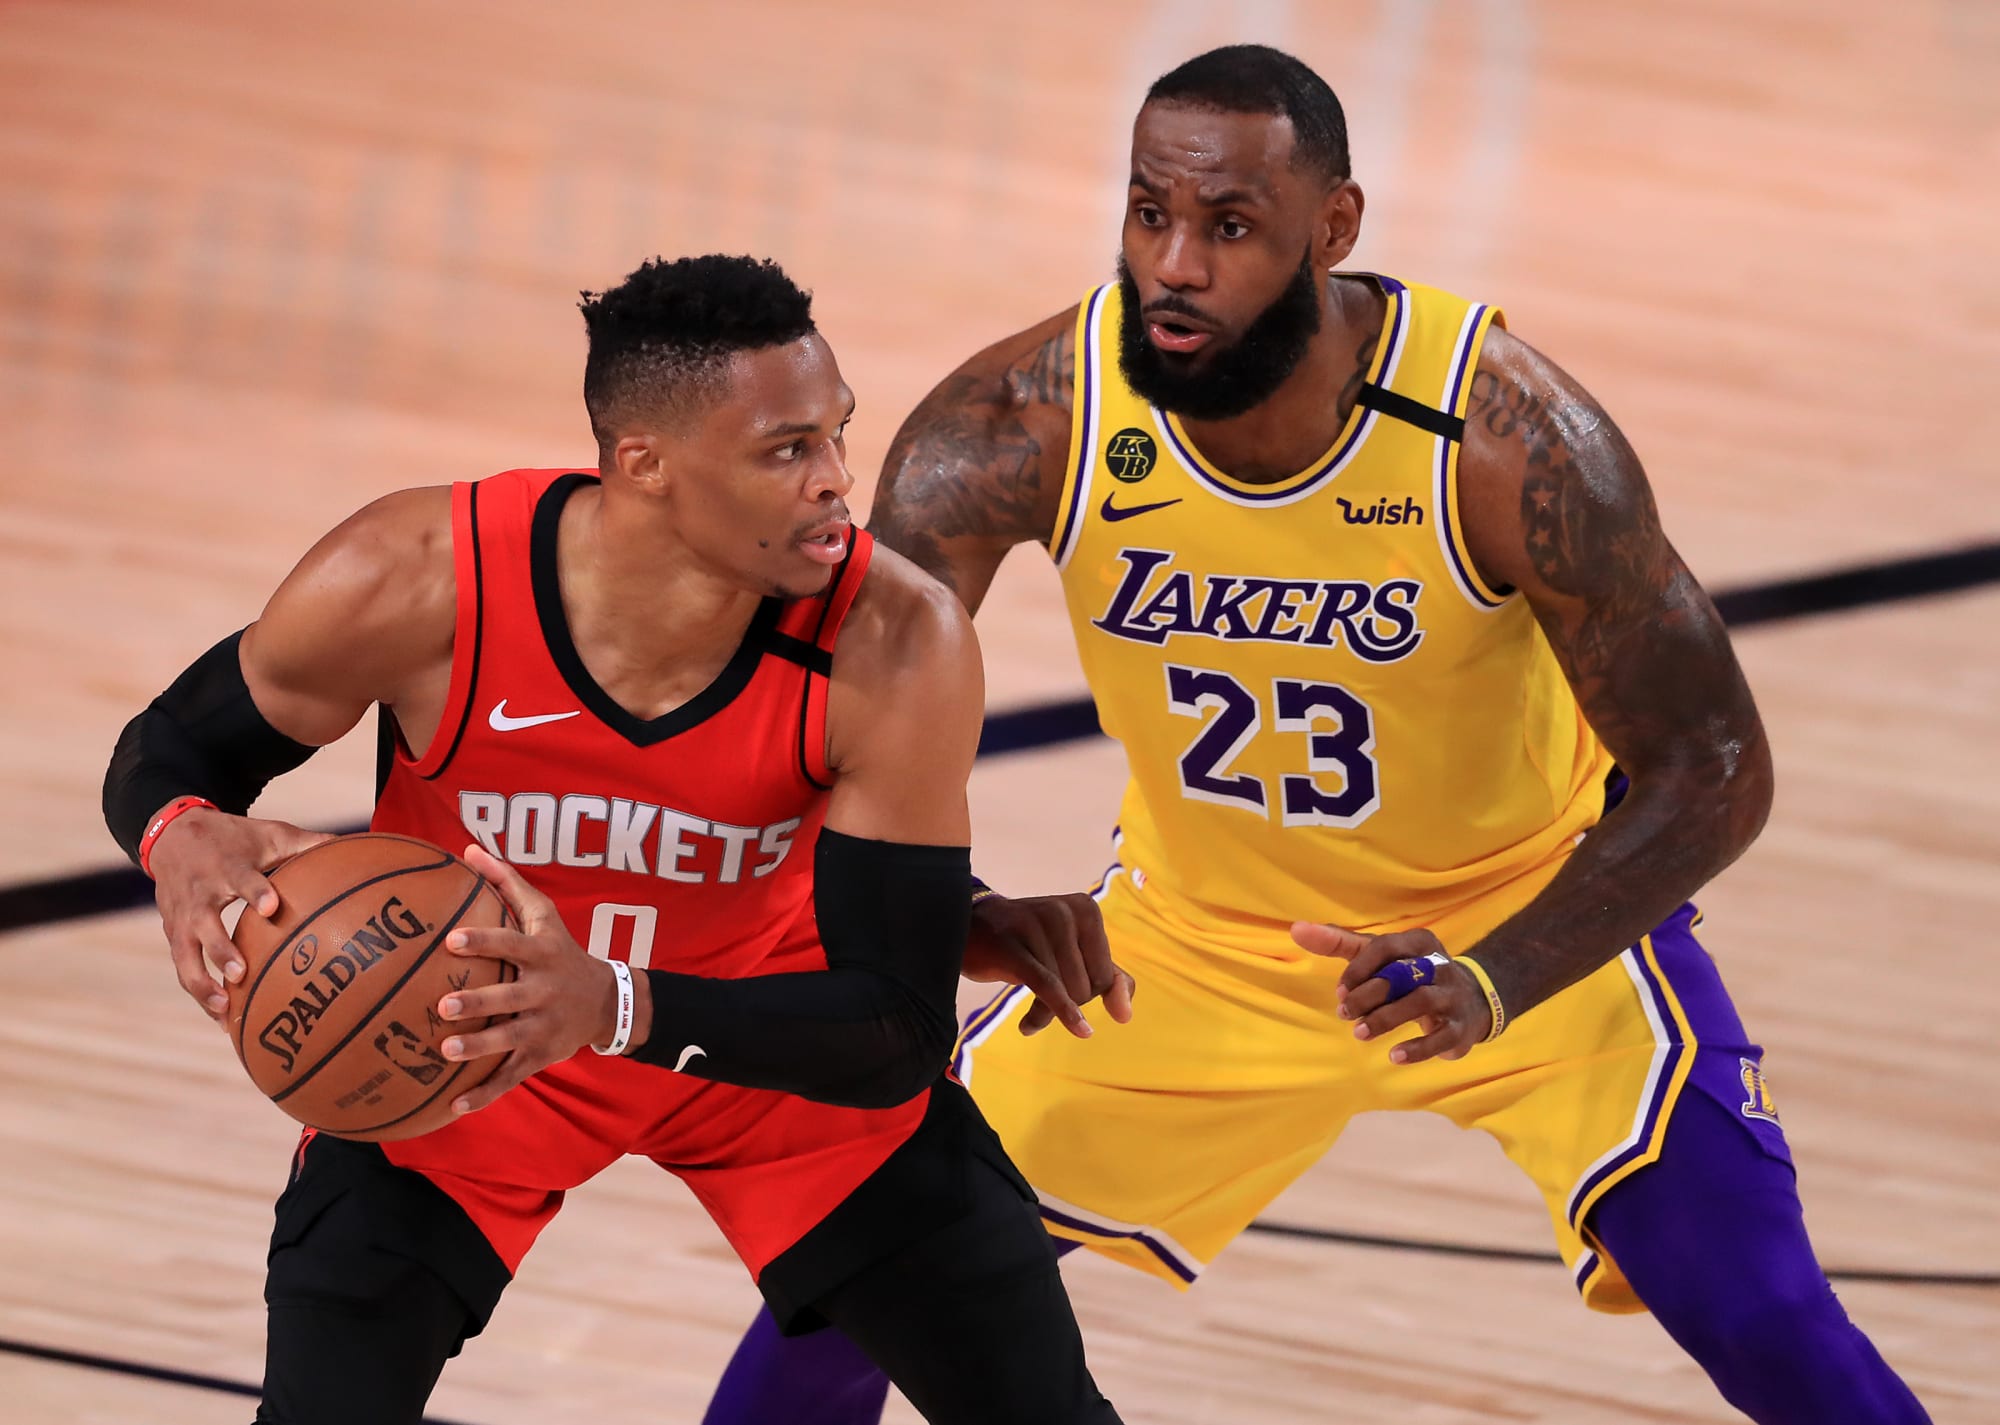 Lakers Vs Rockets 2020 Pictures and Photos - Getty Images